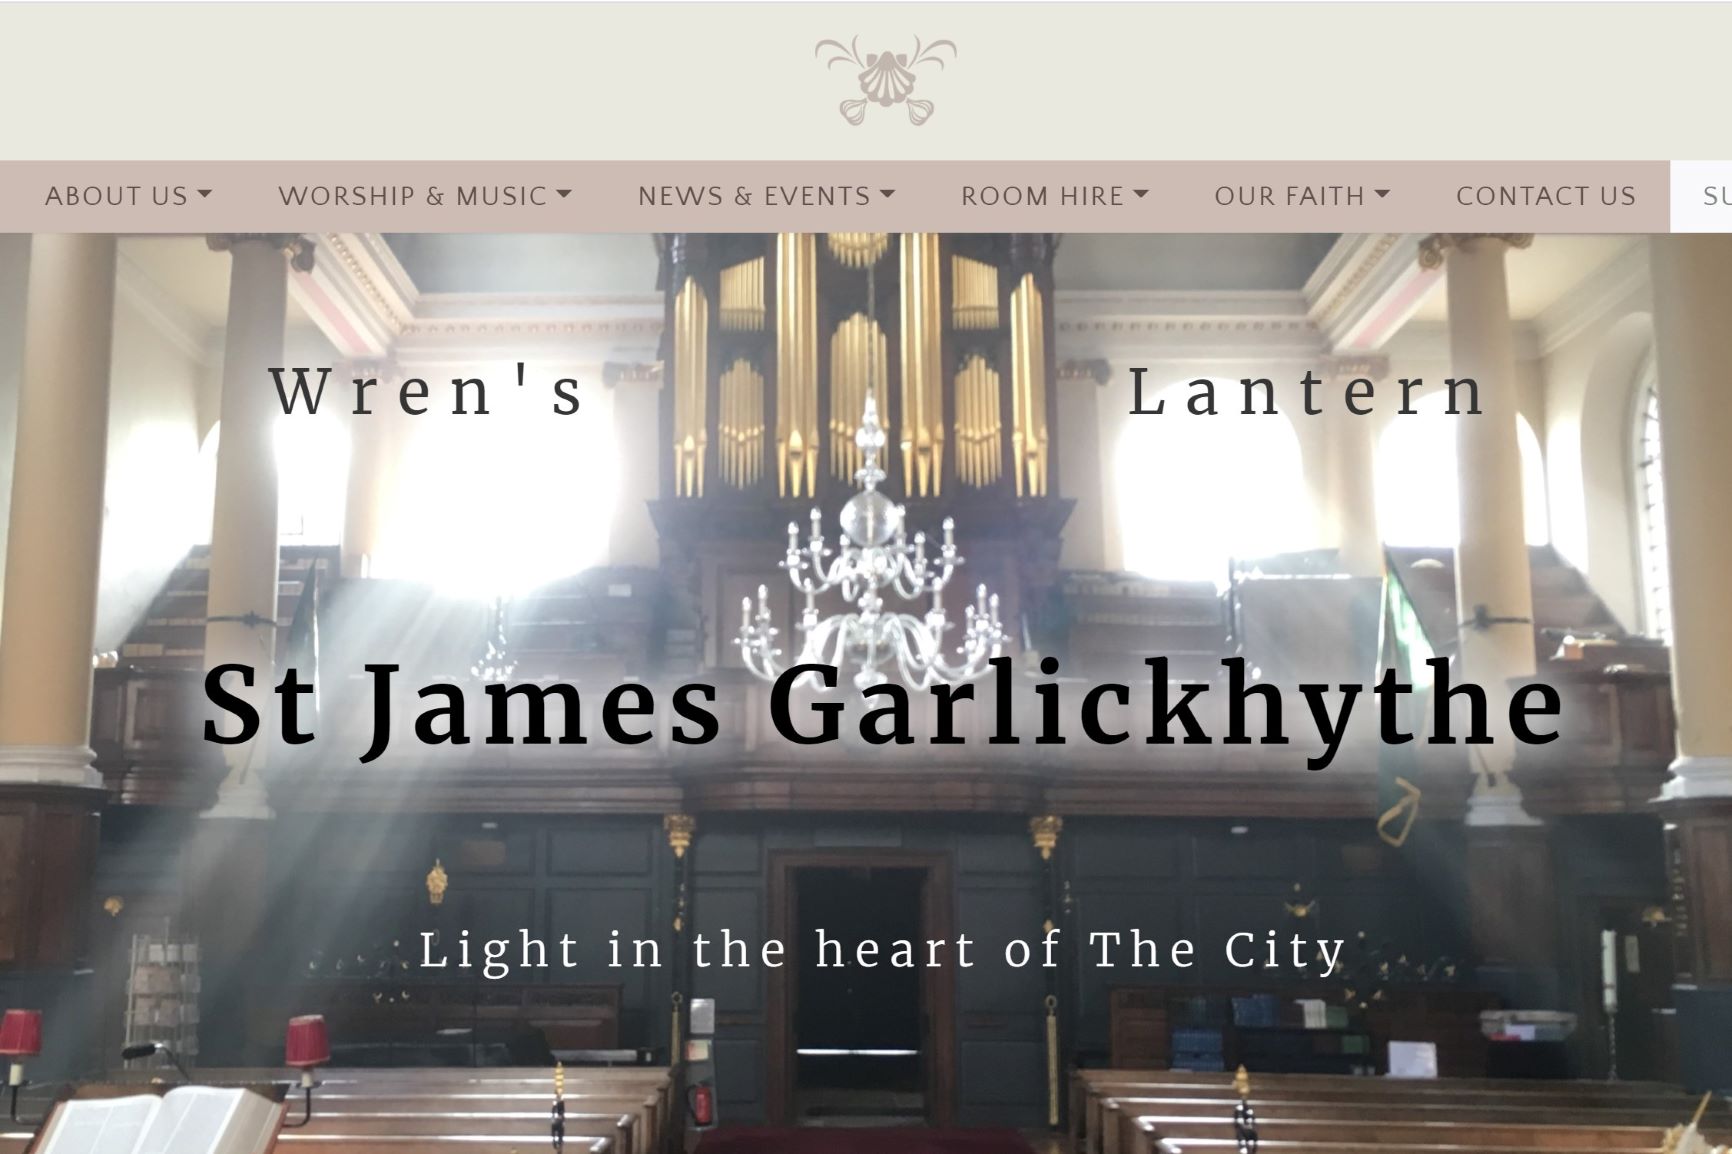 Screenshot of homepage for St James Garlickhythe church in City of London